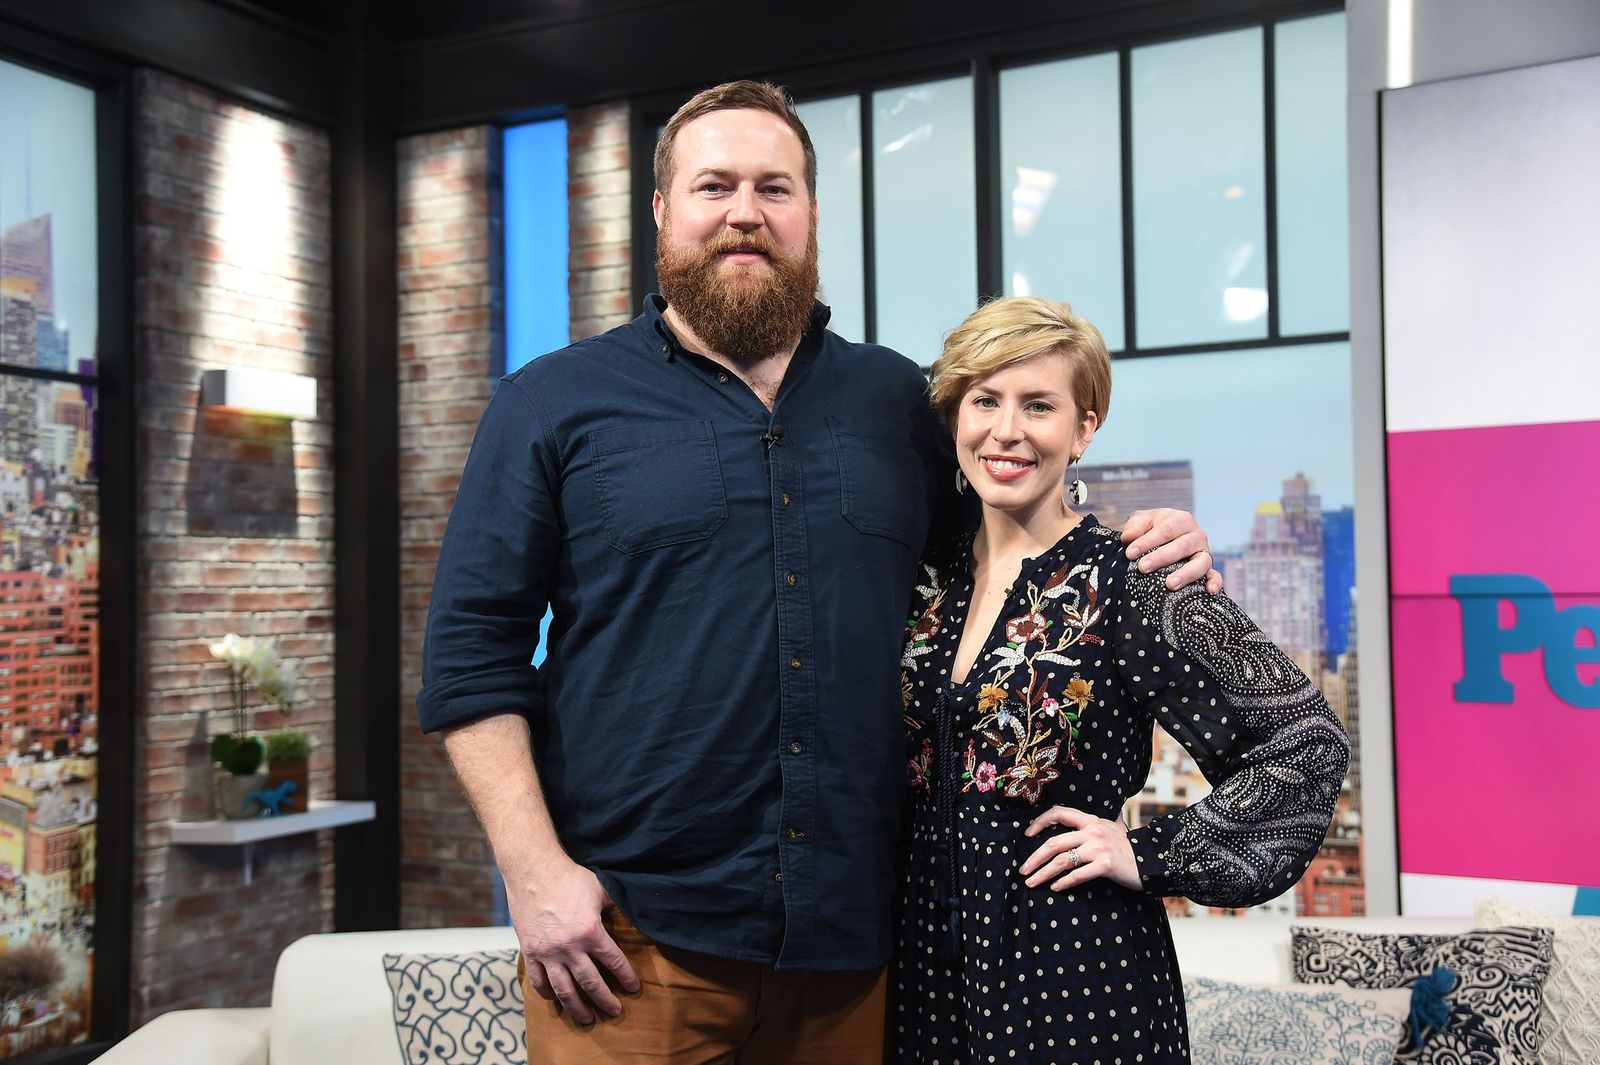 Husband and wife team, Erin and Ben Napier are the stars of "Home Town" on HGTV, January 8,2020. | Photo: Getty Images. 